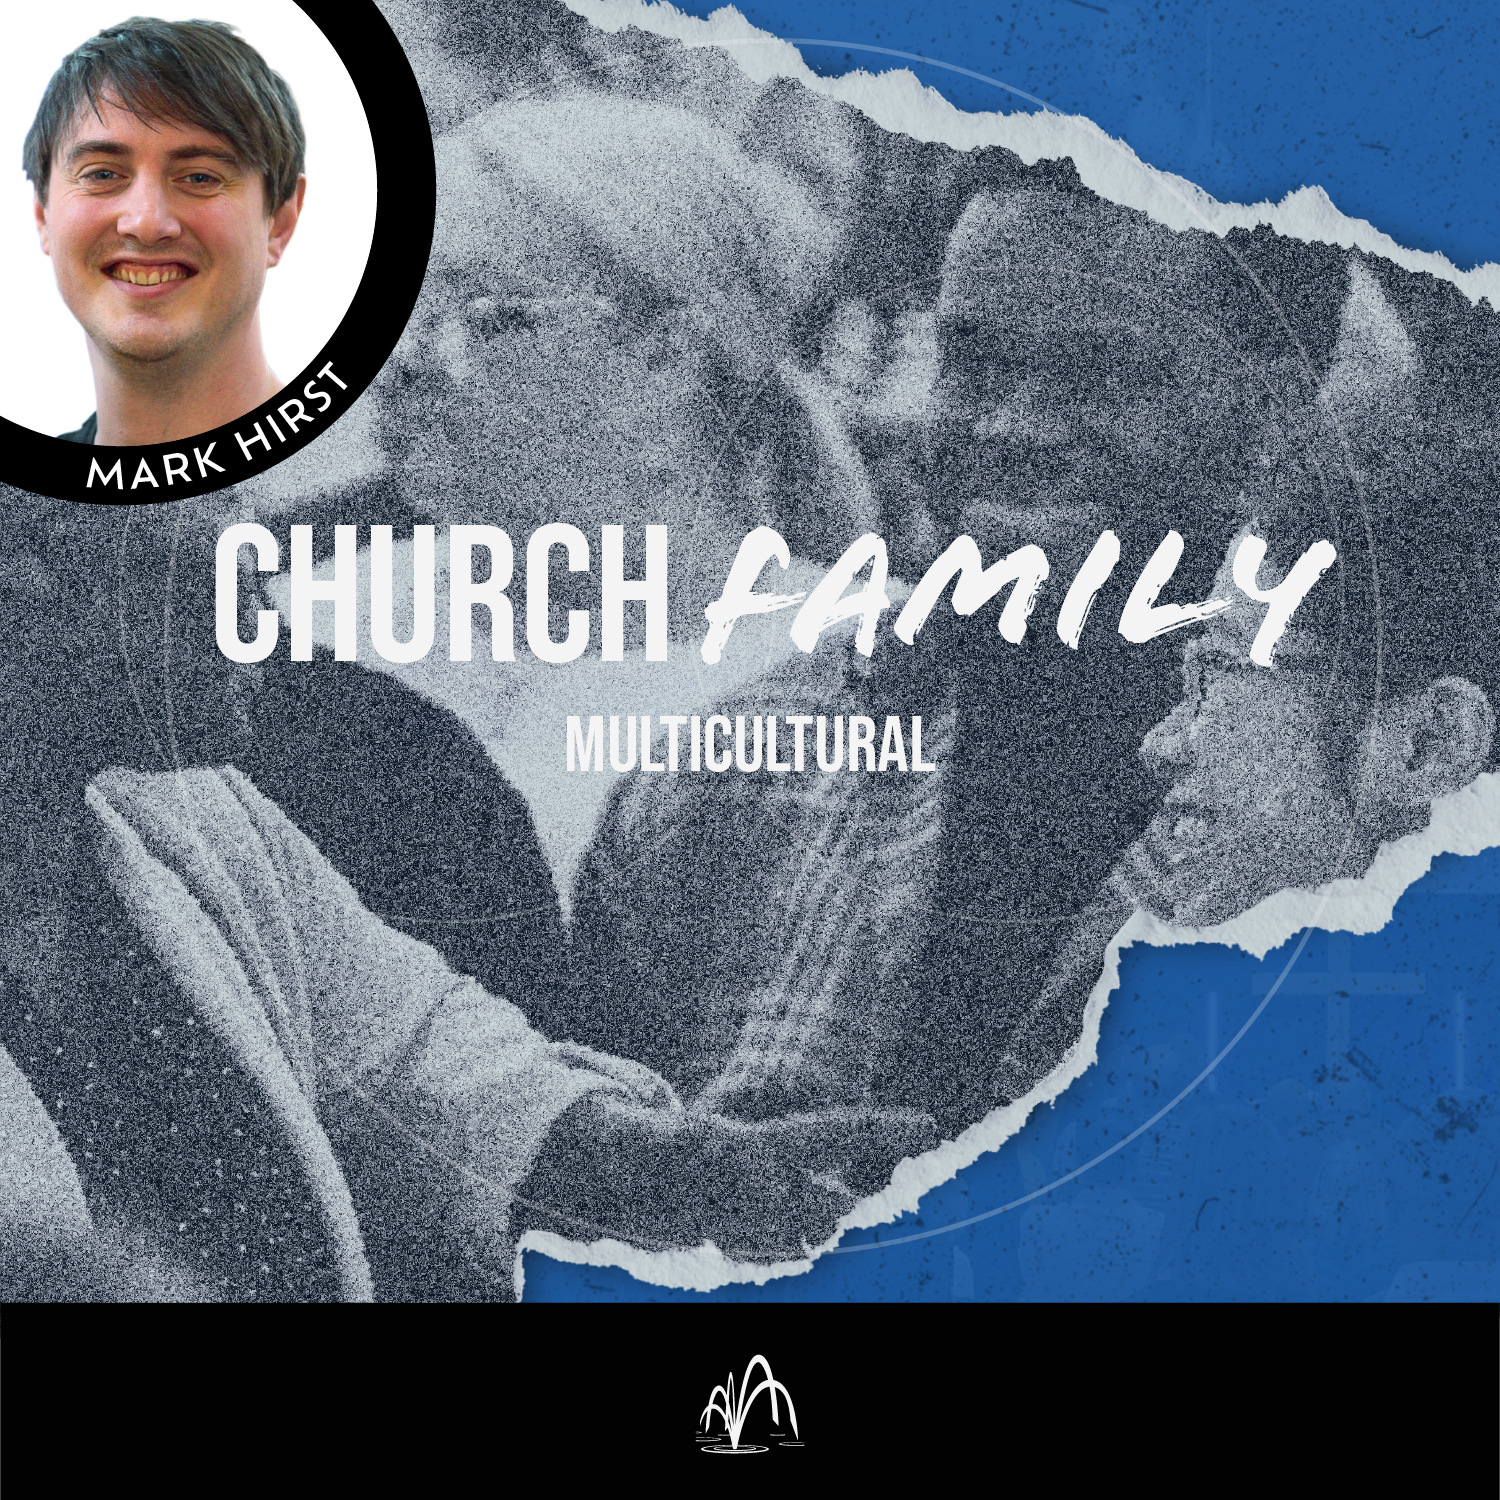 Church Family - Youtube Slide - MULITCULTURAL-01 SOCIAL.png